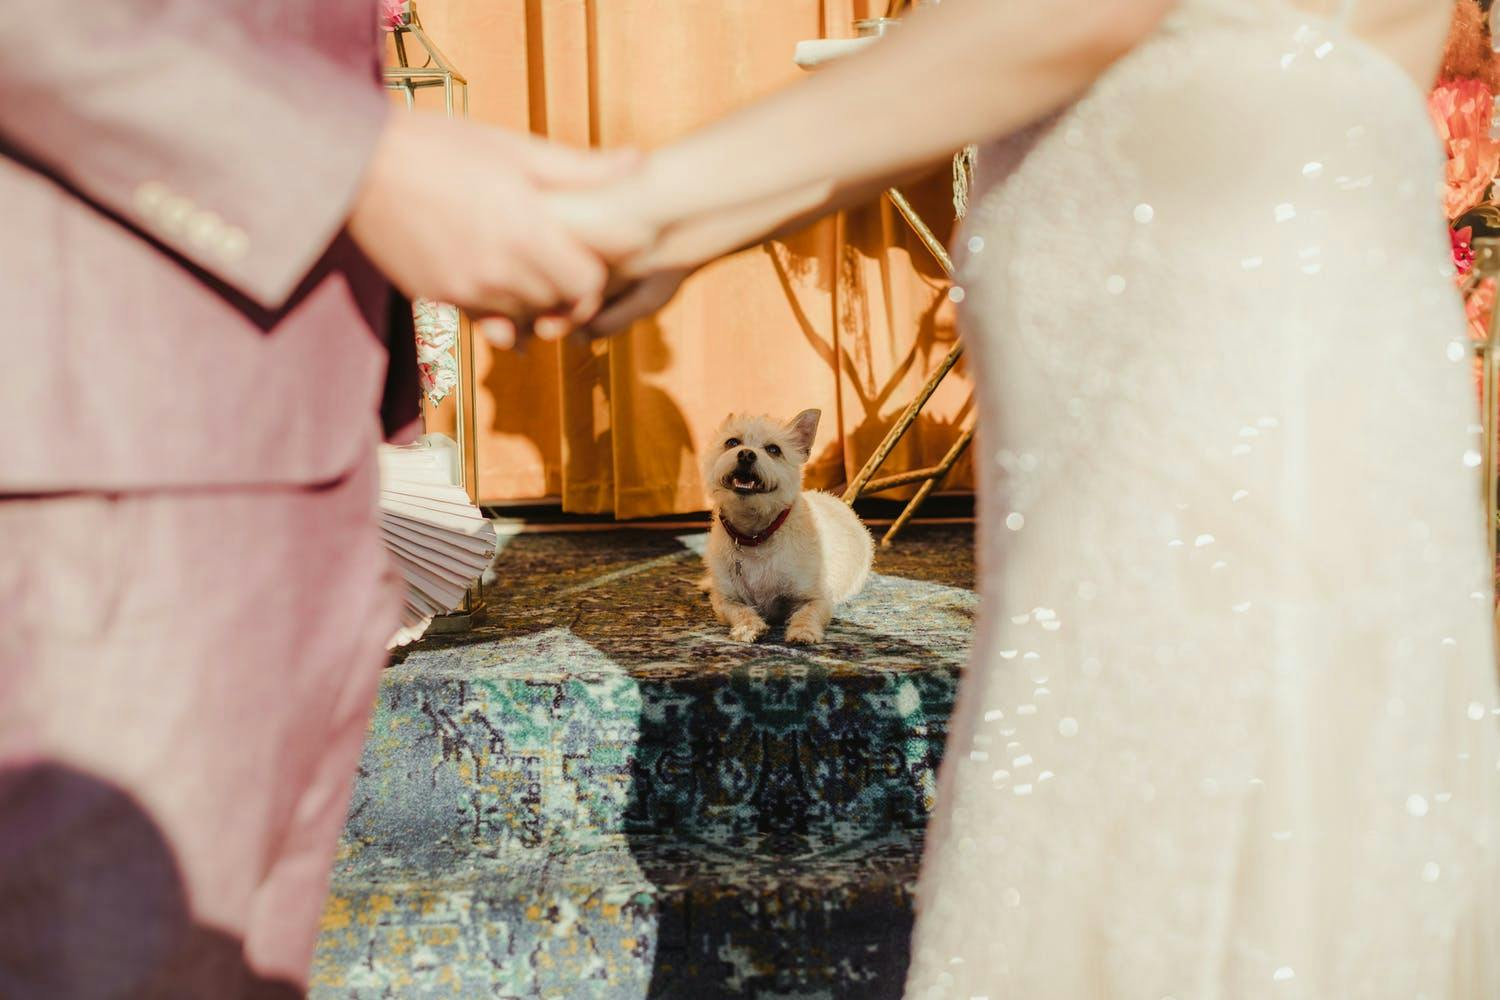 Small dog officiating wedding ceremony | PartySlate